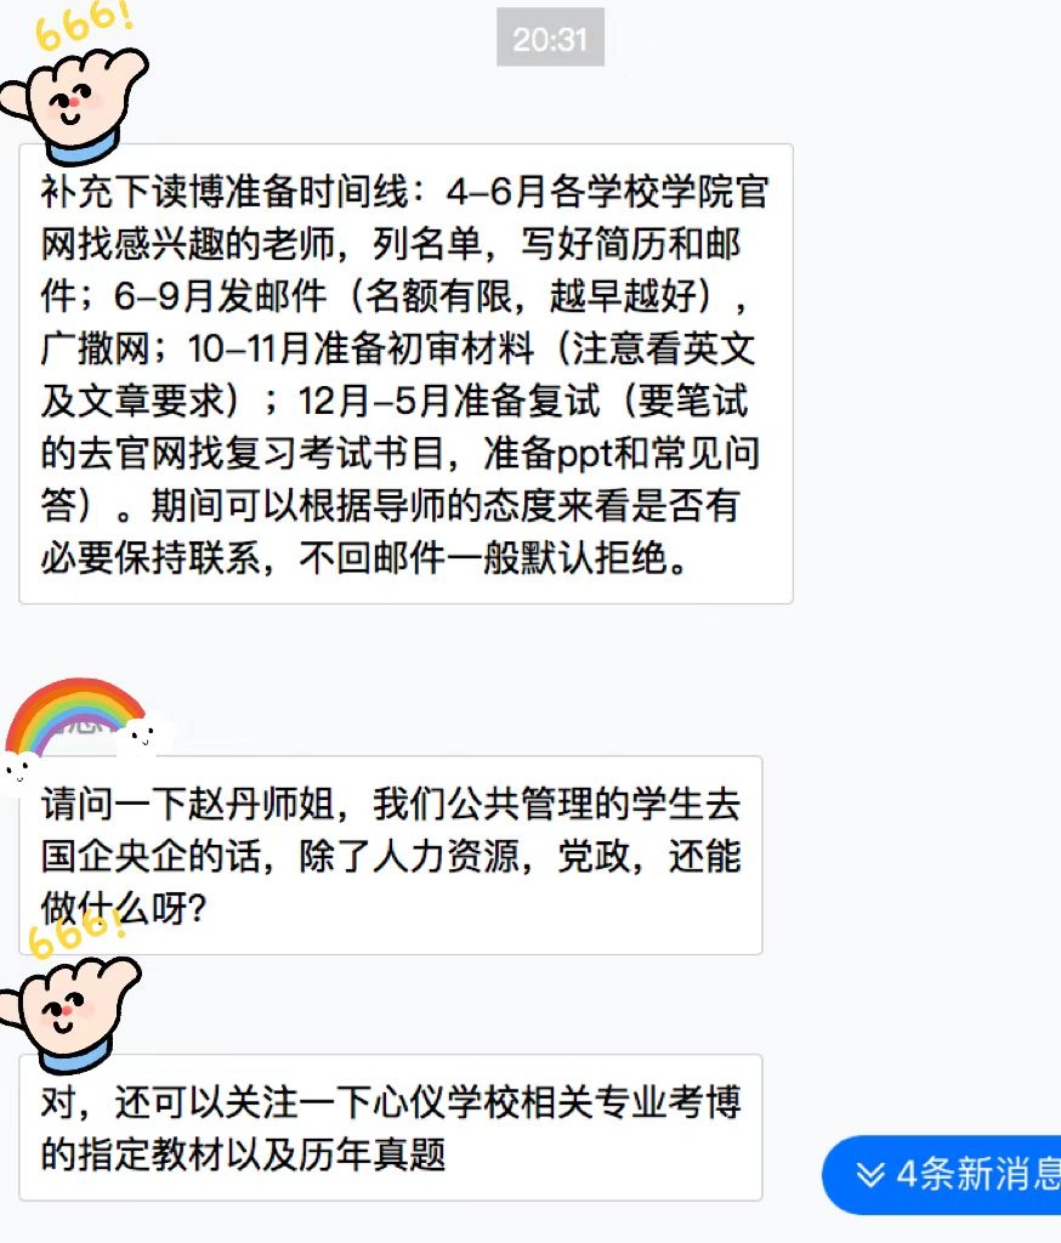 /Users/k-summer/Library/Containers/com.tencent.xinWeChat/Data/Library/Application Support/com.tencent.xinWeChat/2.0b4.0.9/1f6fb2af7553052cf30e2ed704c12e58/Message/MessageTemp/9e20f478899dc29eb19741386f9343c8/Image/171655707460_.pic.jpg